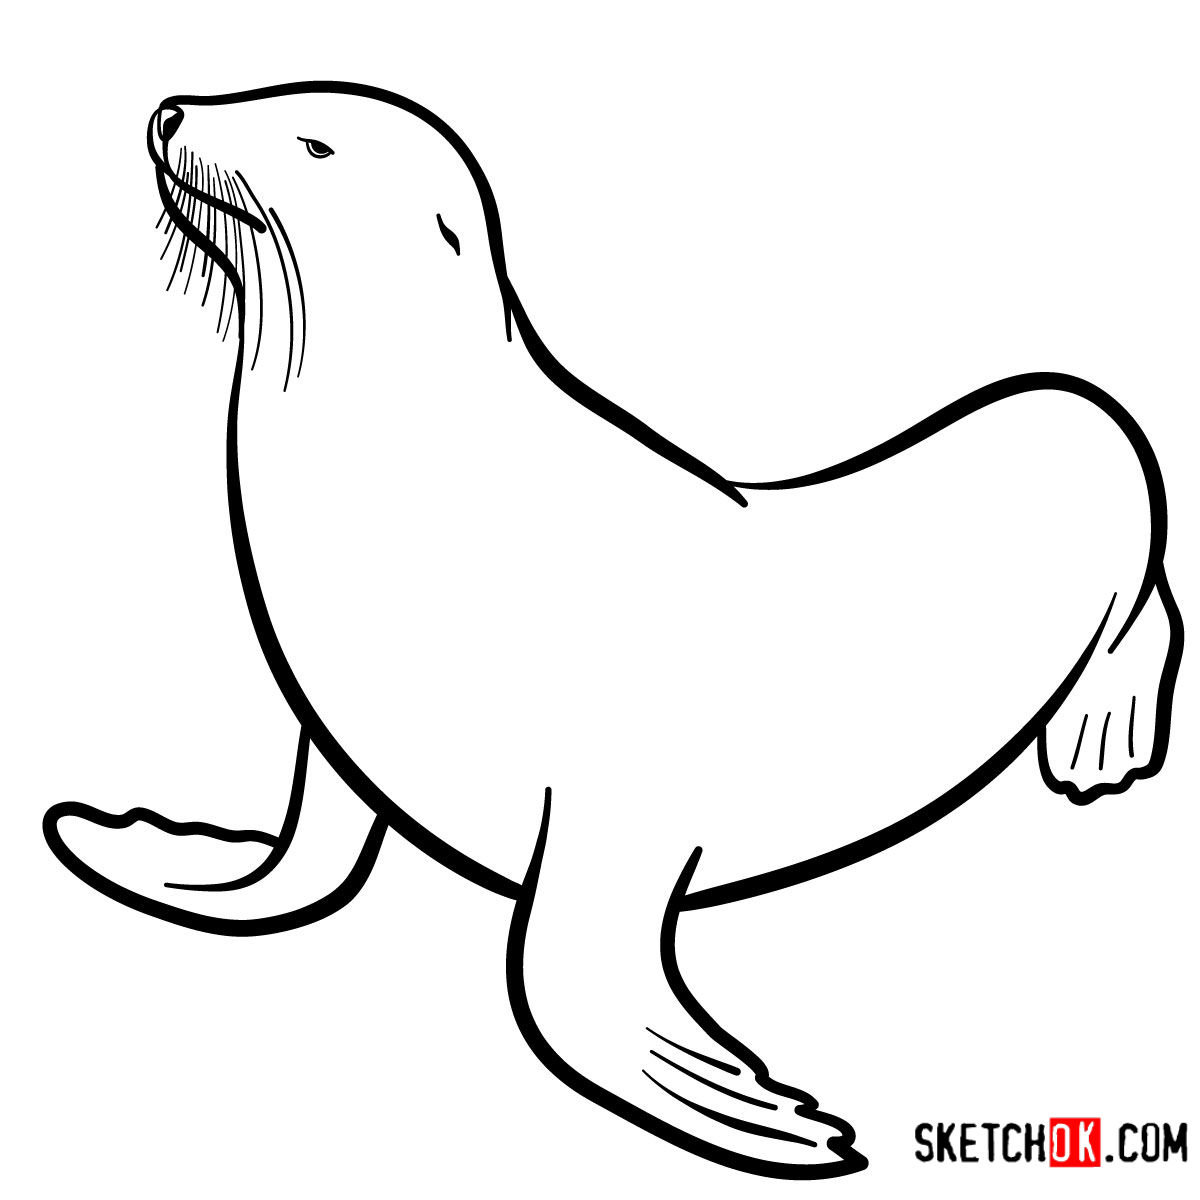 How to draw a Sea lion | Sea Animals - Sketchok easy drawing guides